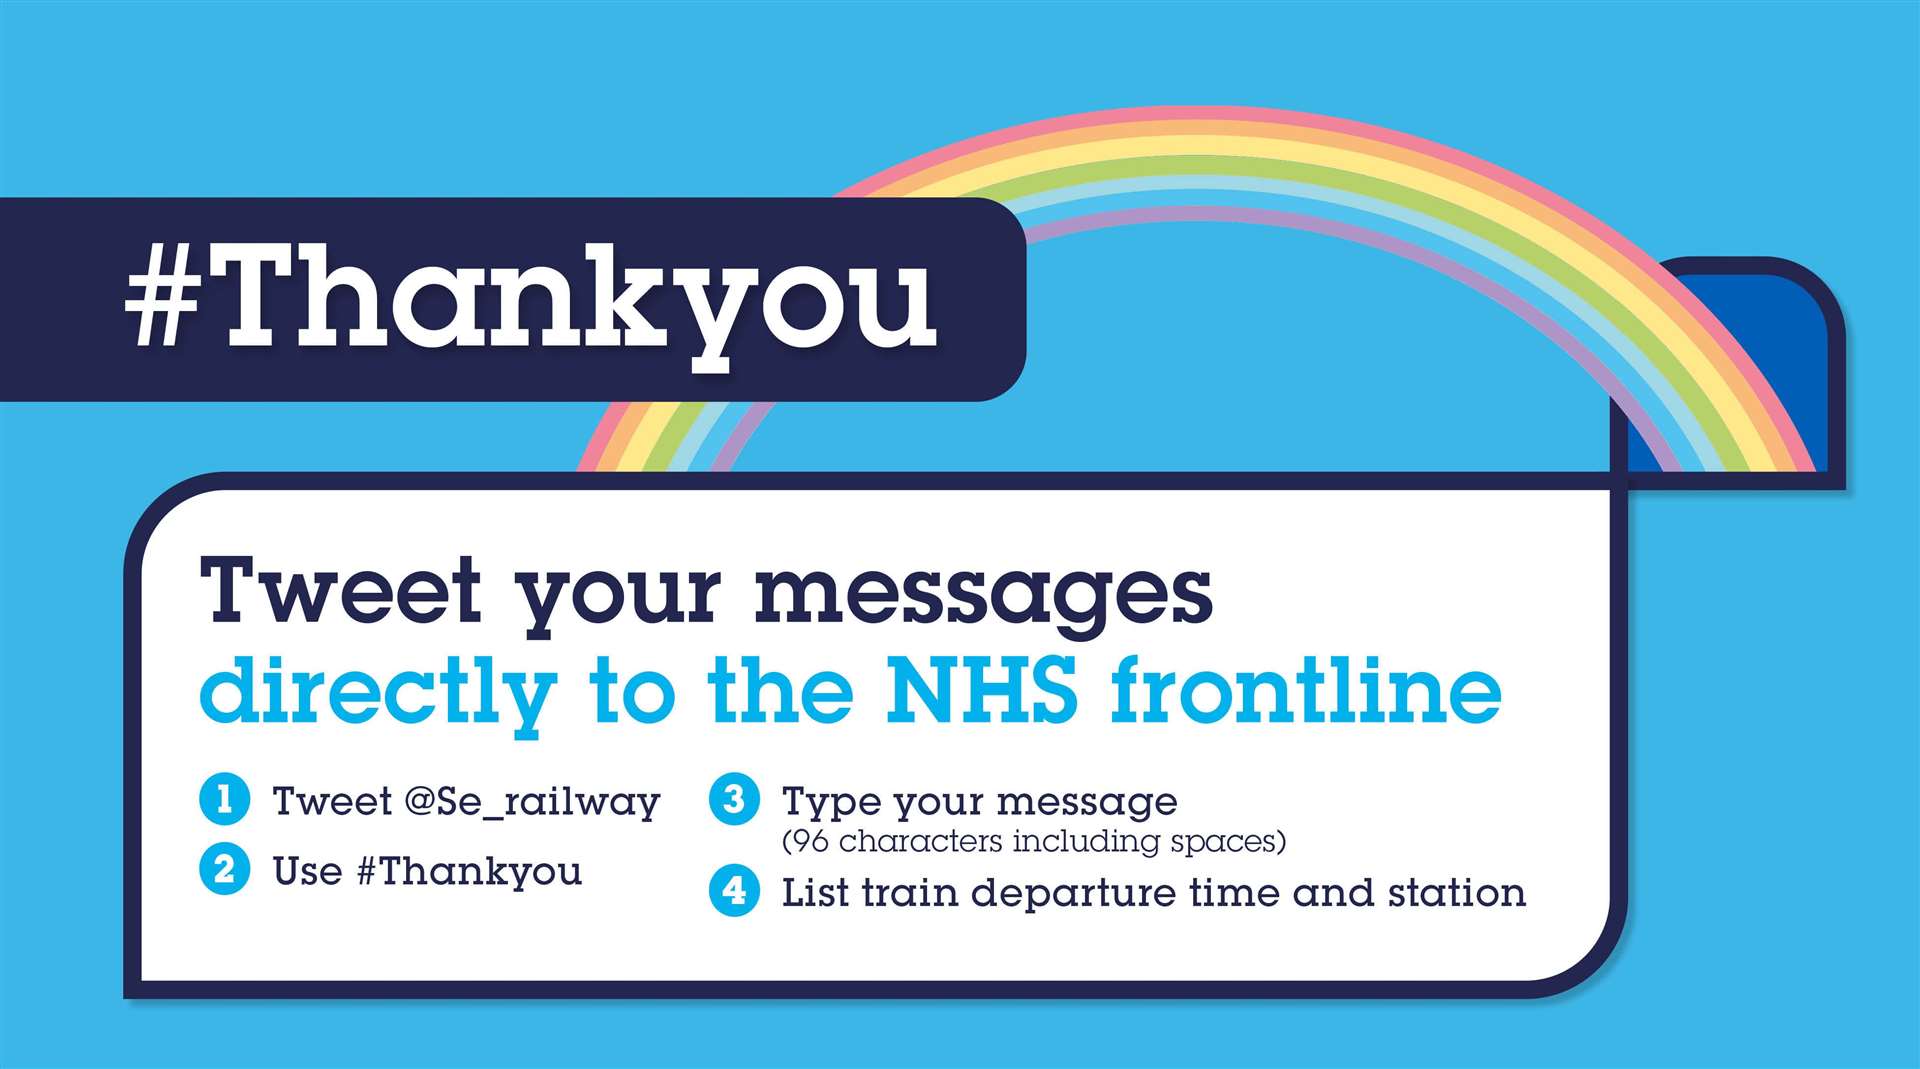 Southeastern launches its #ThankYou campaign